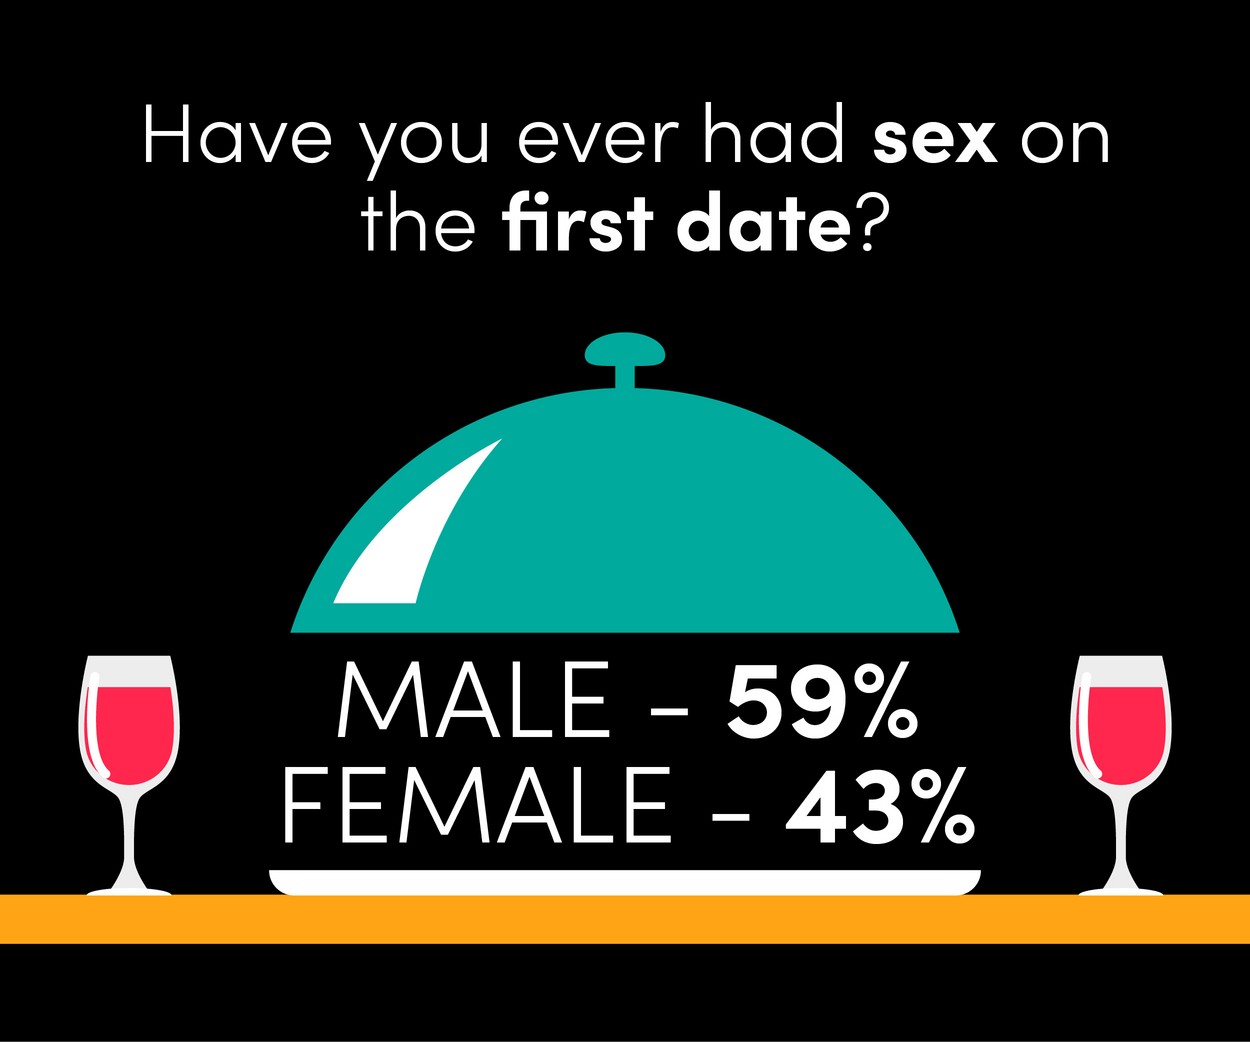 Have you ever sex on a first date?